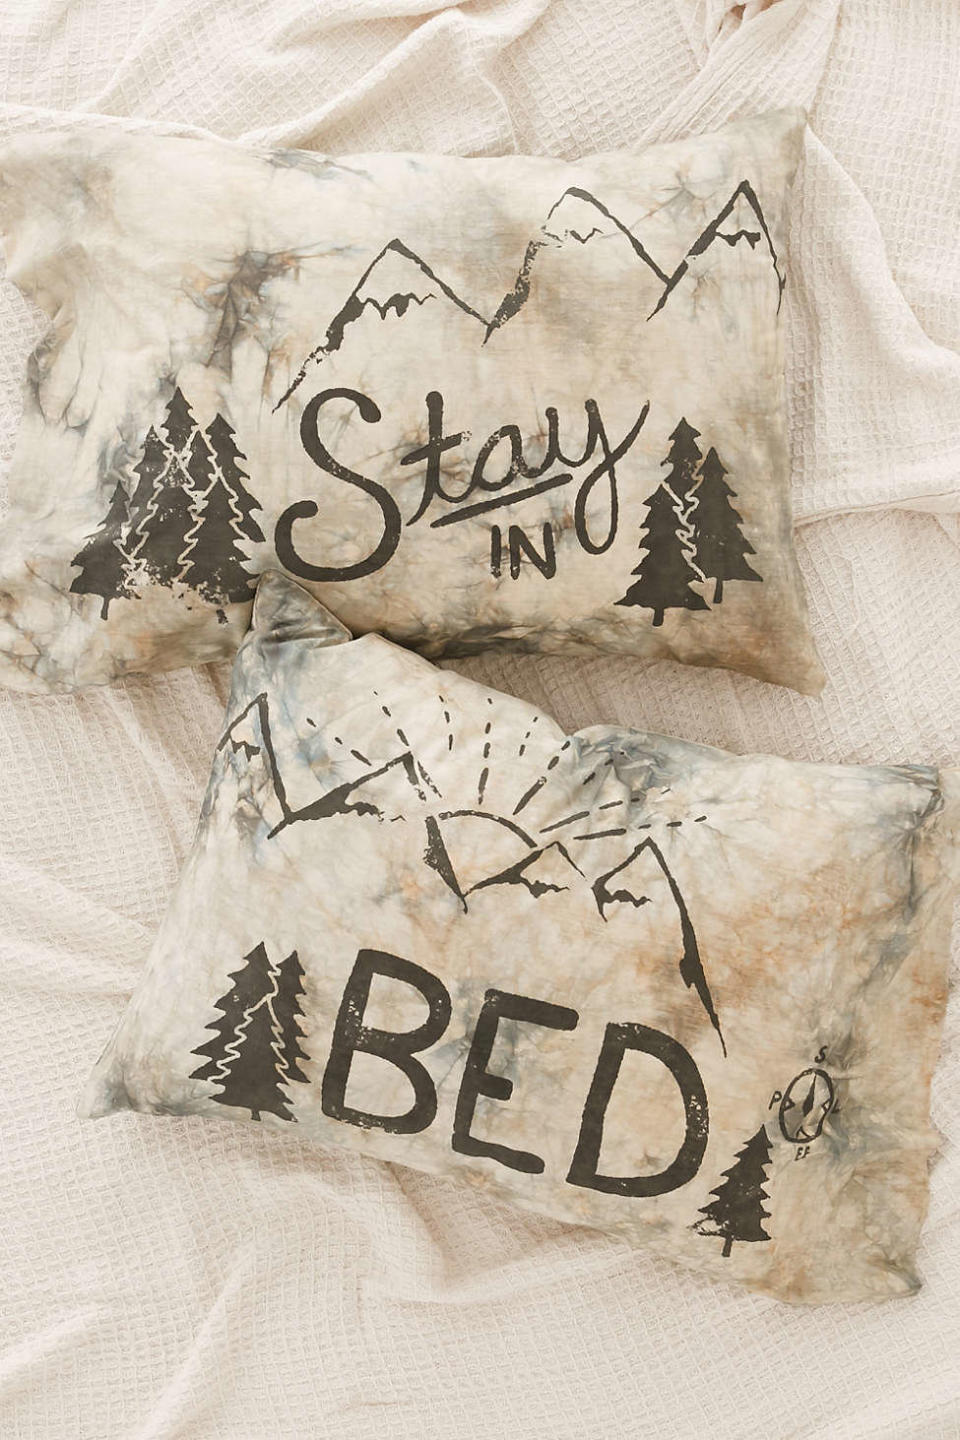 <a href="http://www.urbanoutfitters.com/urban/catalog/productdetail.jsp?id=40088544&amp;category=A_DEC_BEDDING" target="_blank">Stay In Bed Dyed Pillowcase&nbsp;Set</a>, $39 at <a href="http://www.urbanoutfitters.com/urban/index.jsp?cm_sp=SITE_HEADER-_-HOME-_-index.jsp" target="_blank">Urban Outfitters</a>